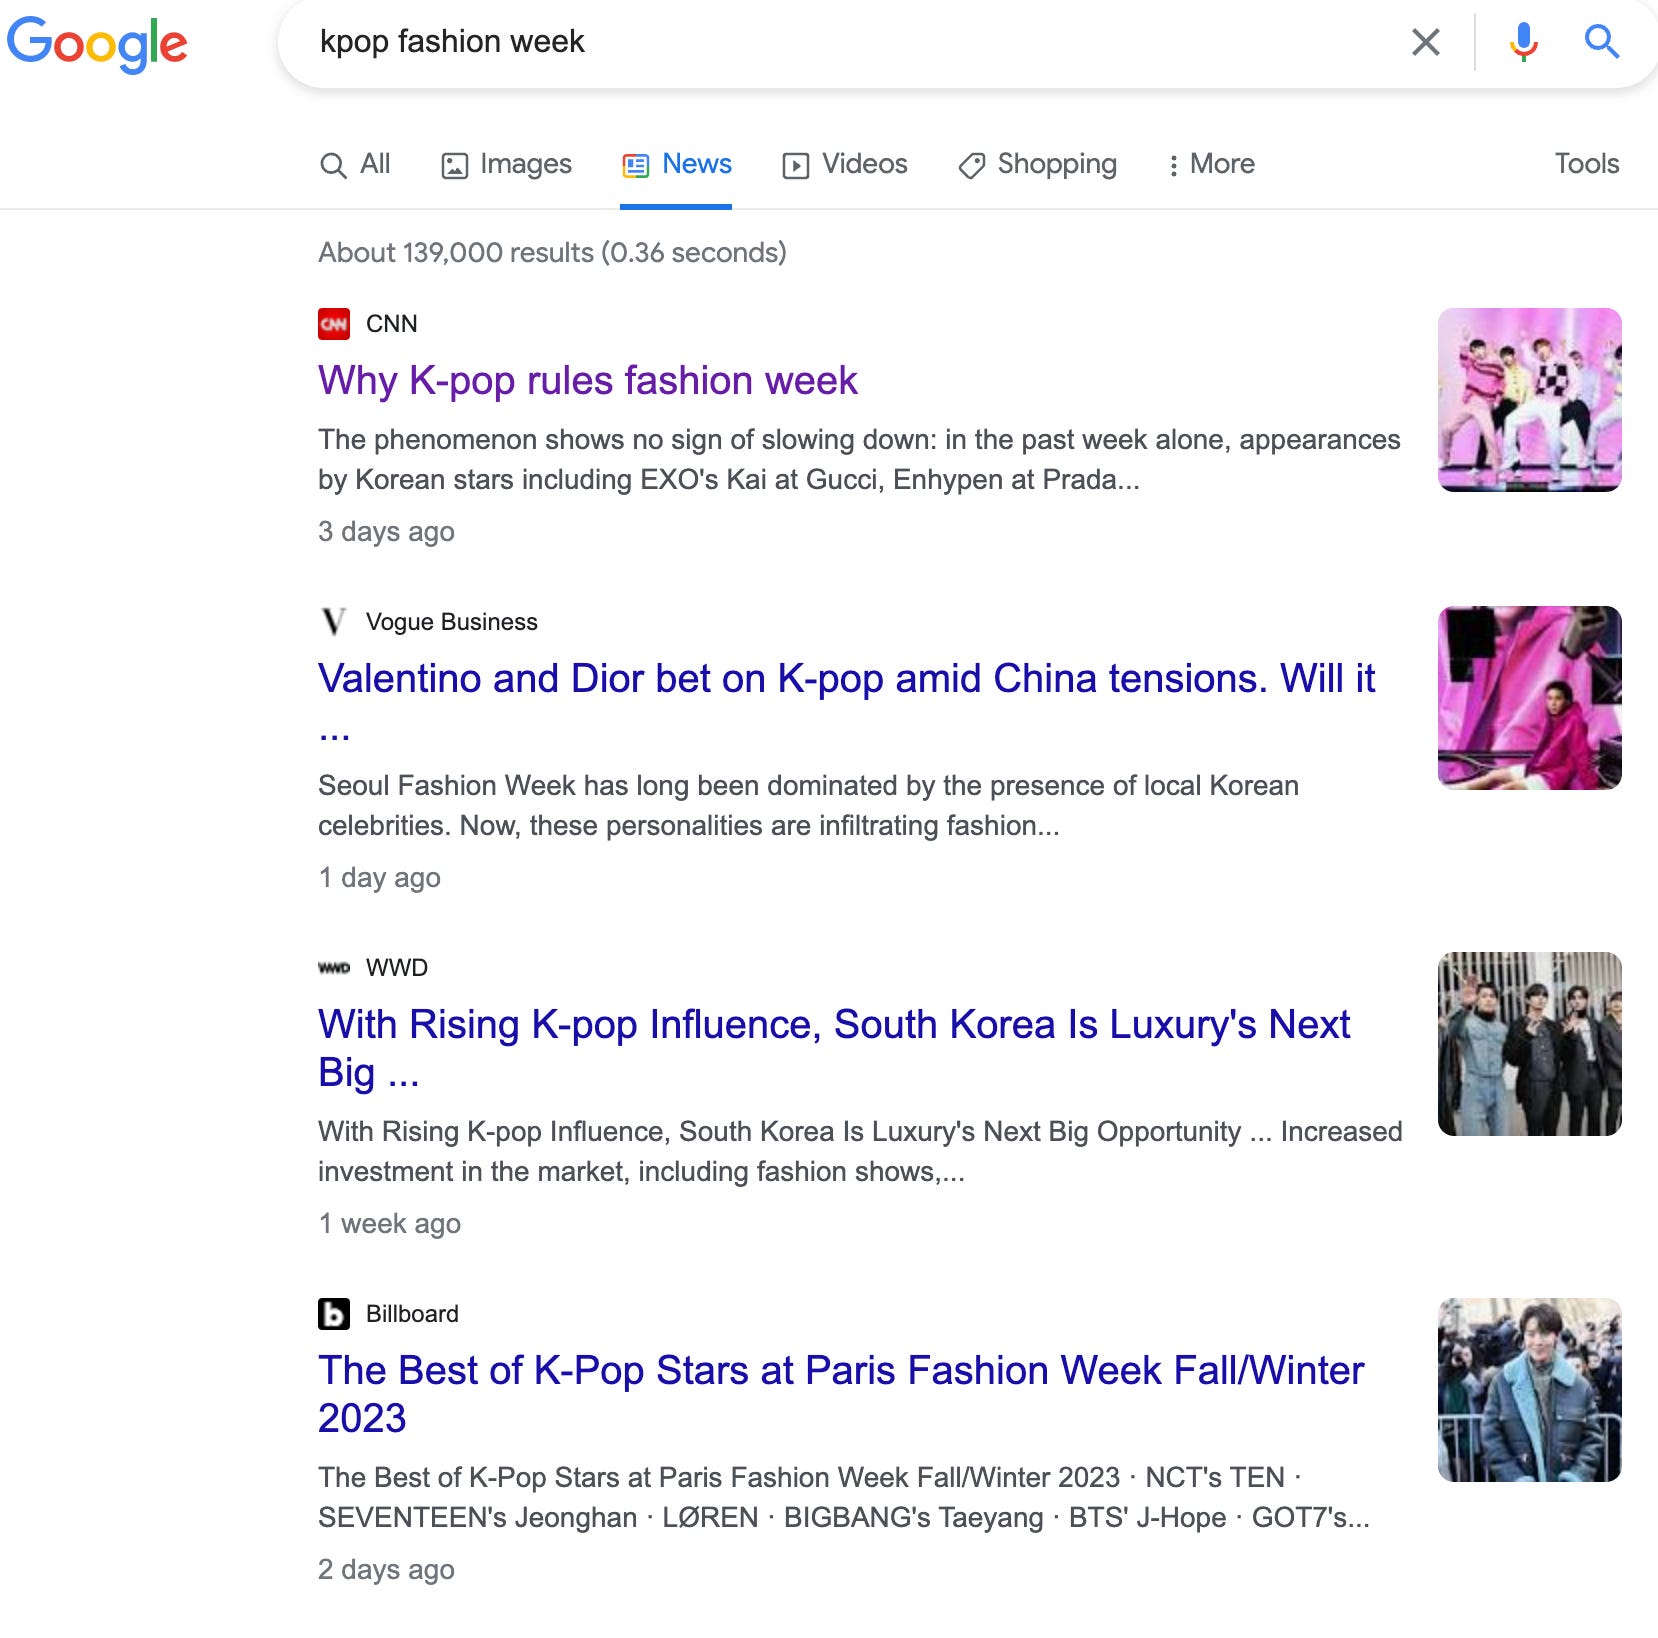 Search results for "kpop fashion week"